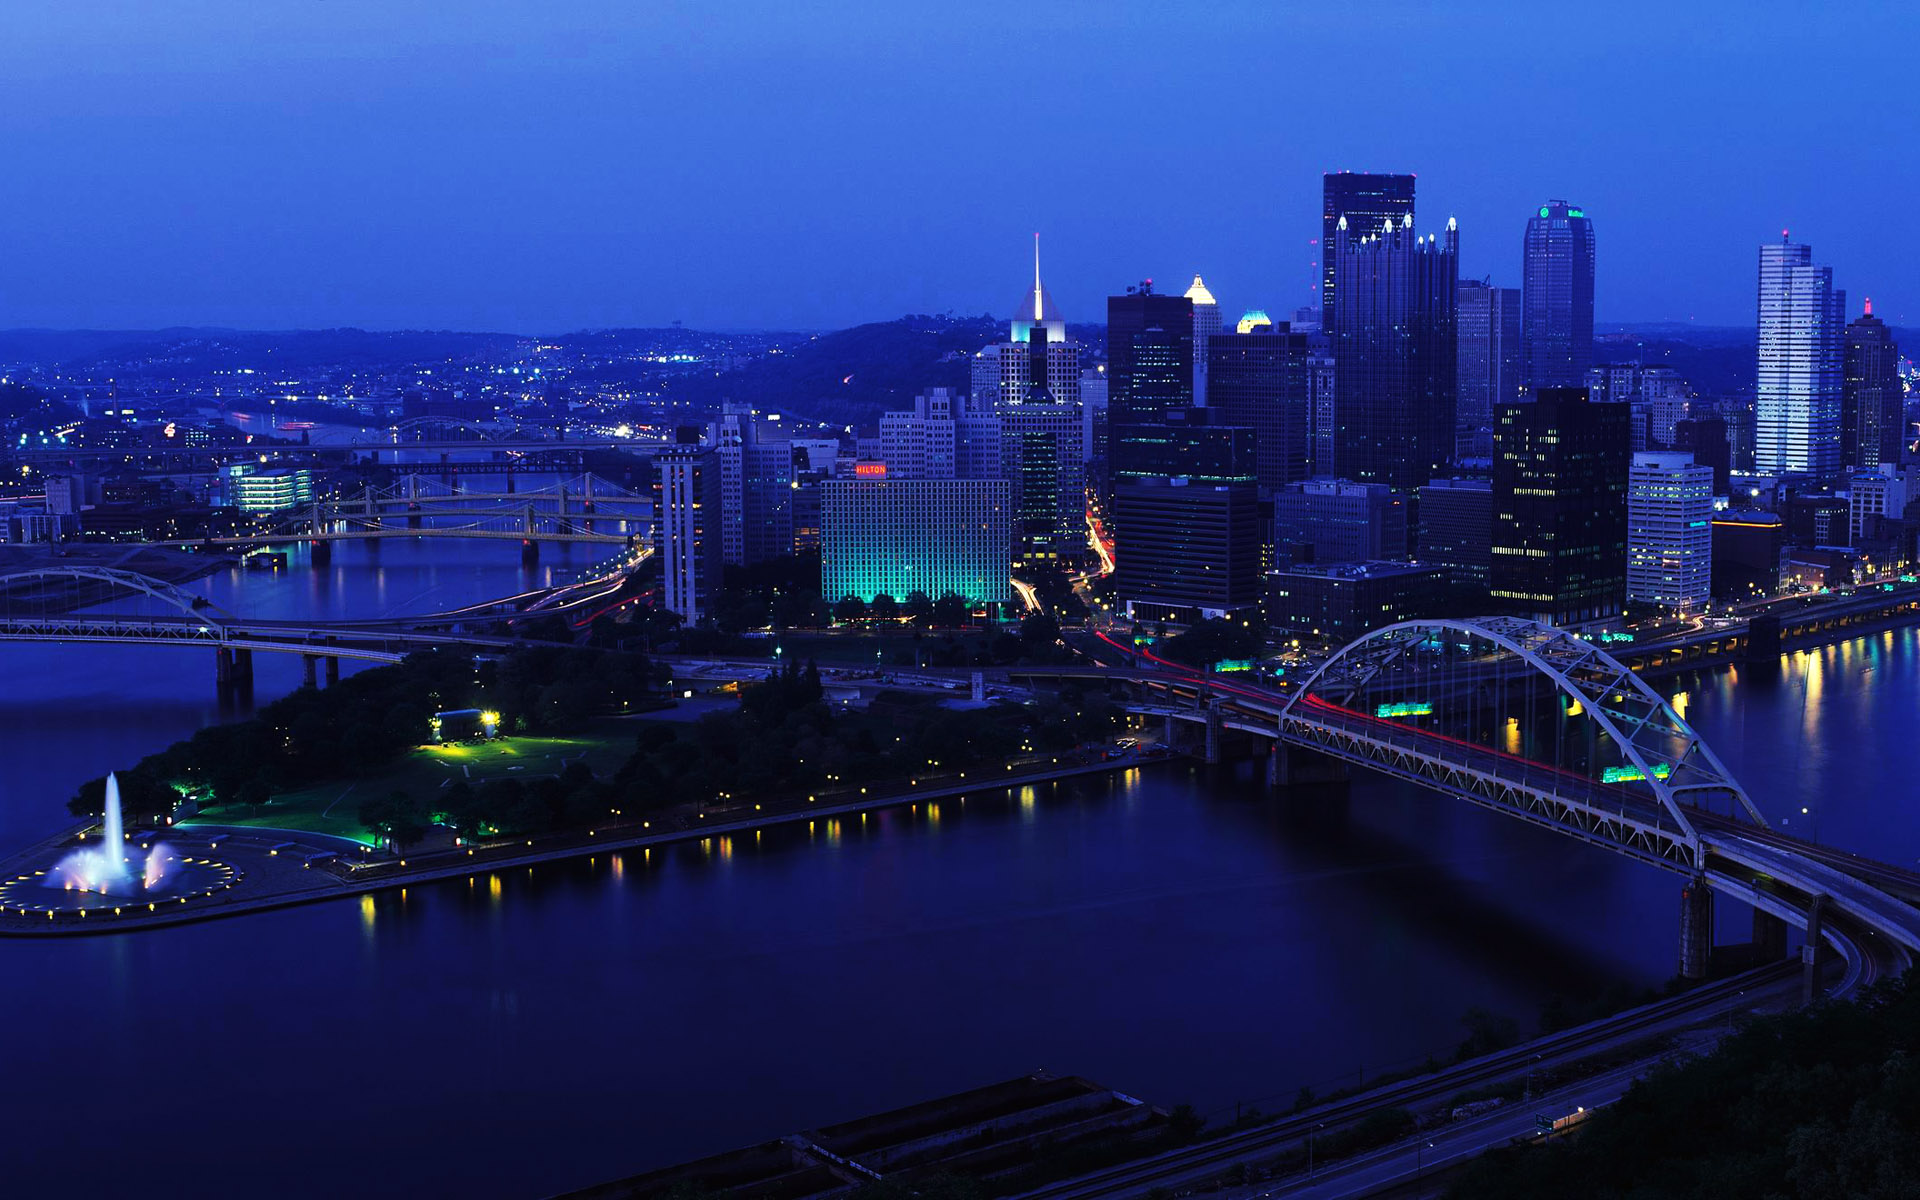 man made, pittsburgh, cities